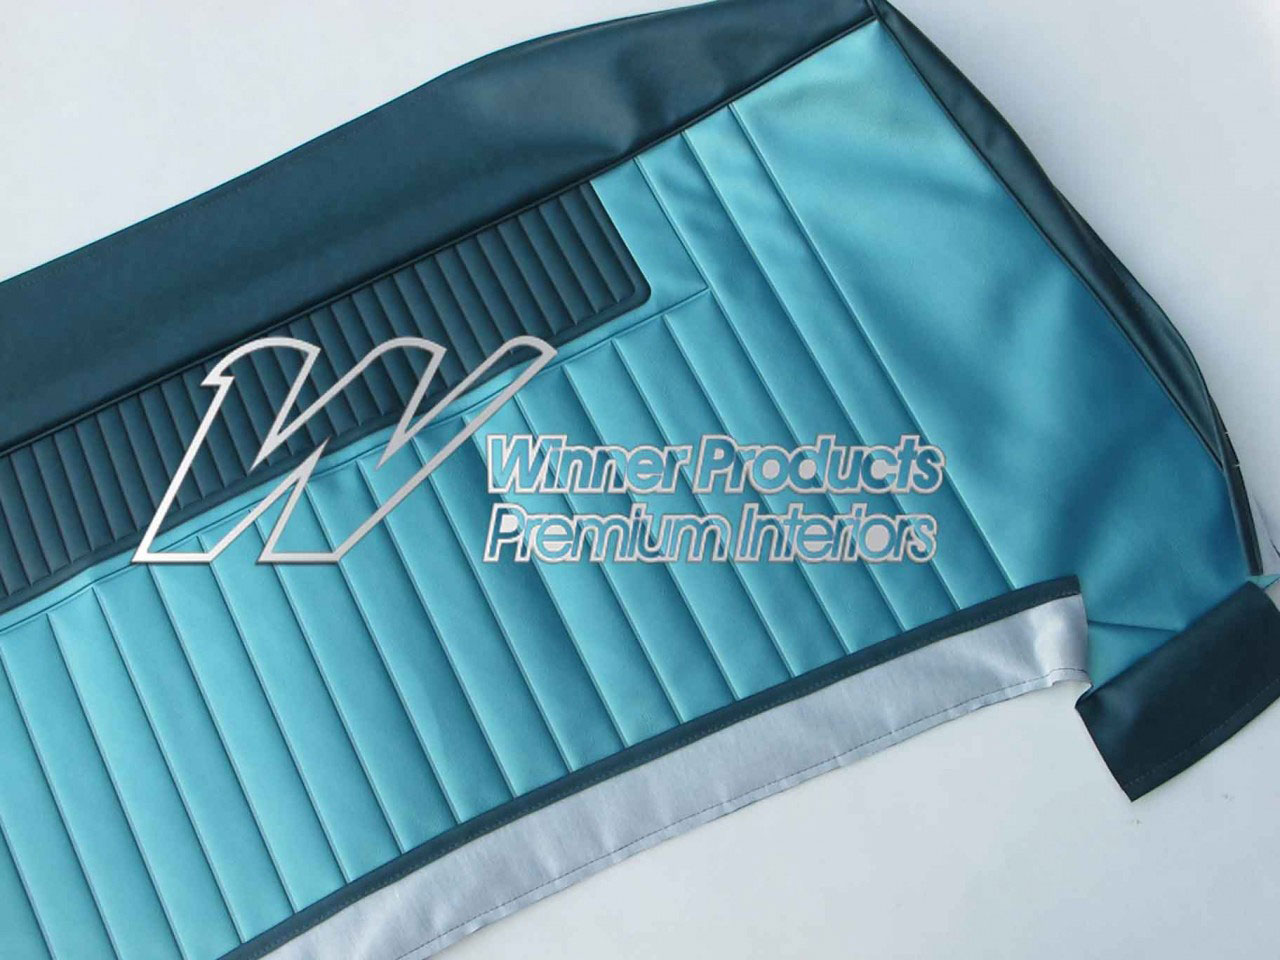 Holden Special EH Special Sedan C32 Gem & Tiara Turquoise Seat Covers (Image 6 of 7)